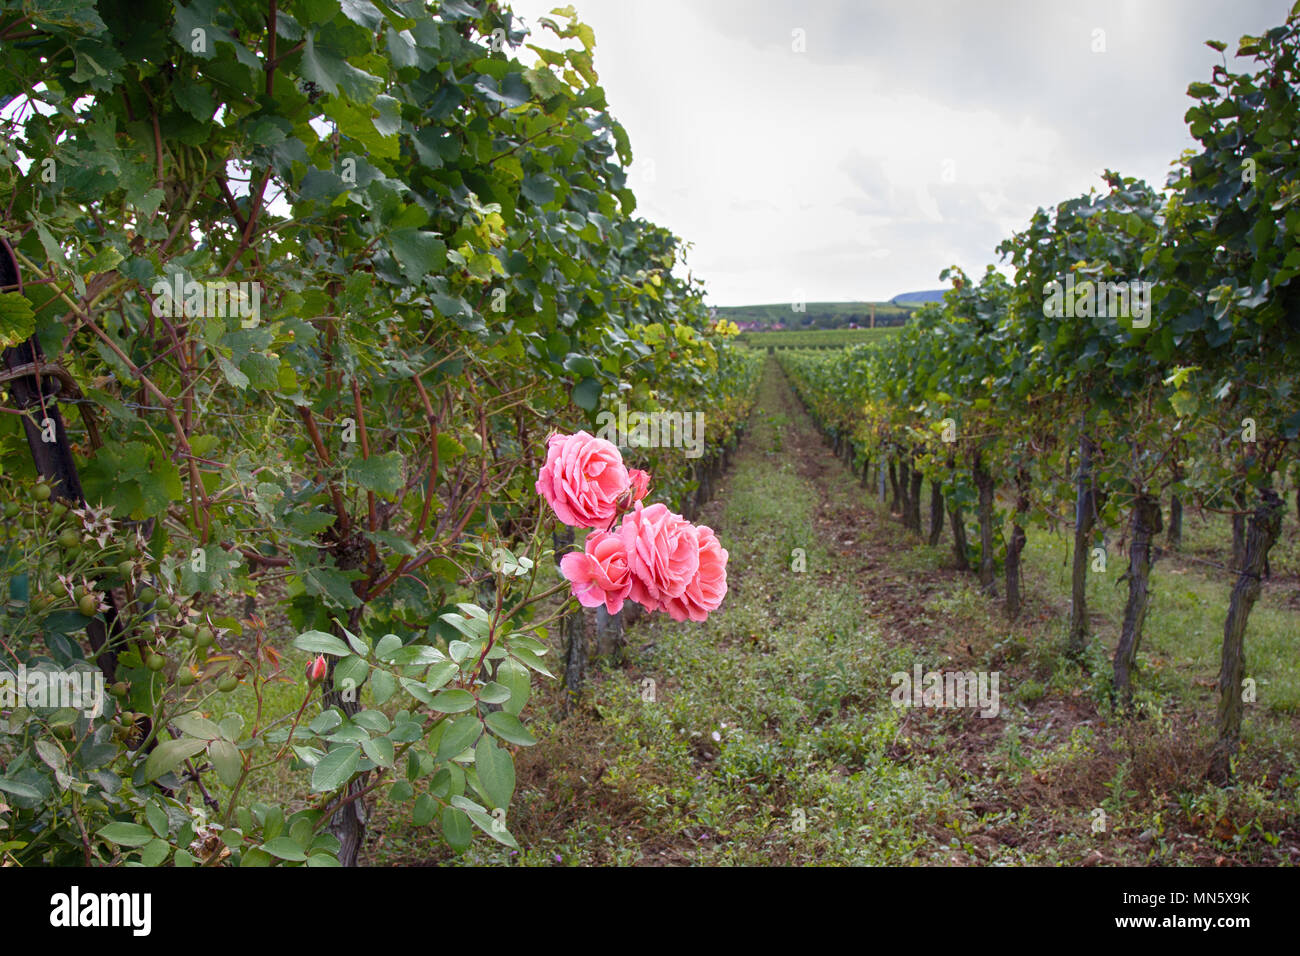 Viticulture And Horticulture Edge Of Estate With Rose Garden And